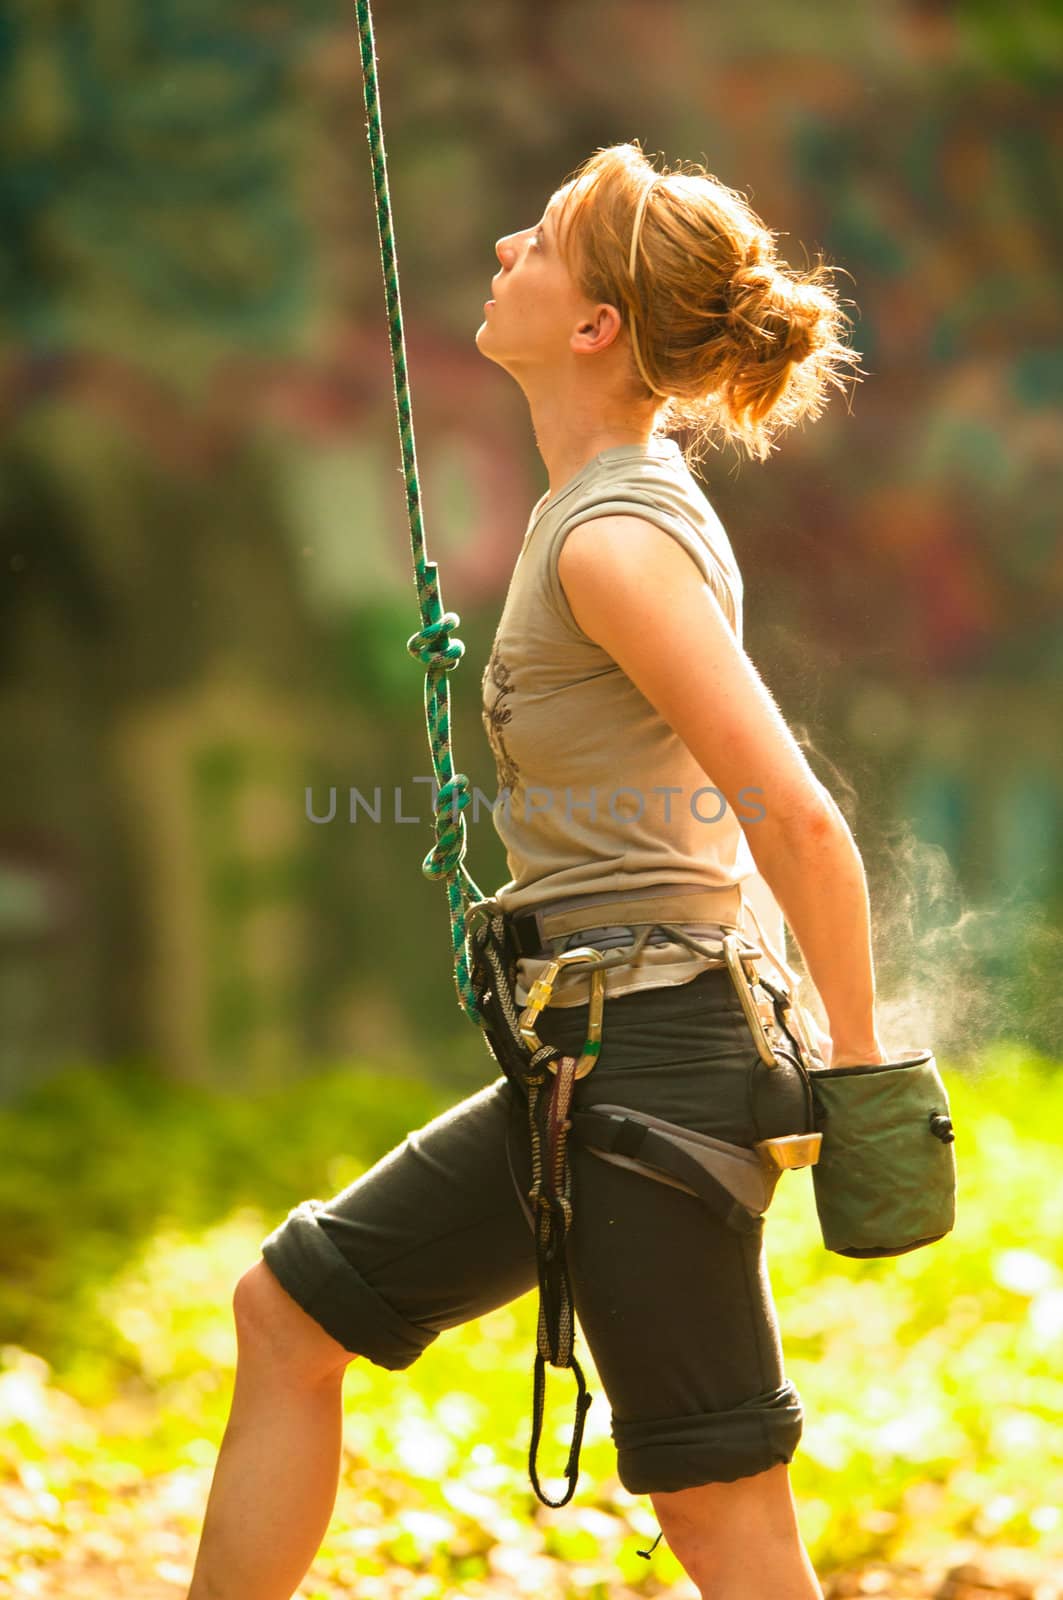 Female rock climber climbing a stone structure